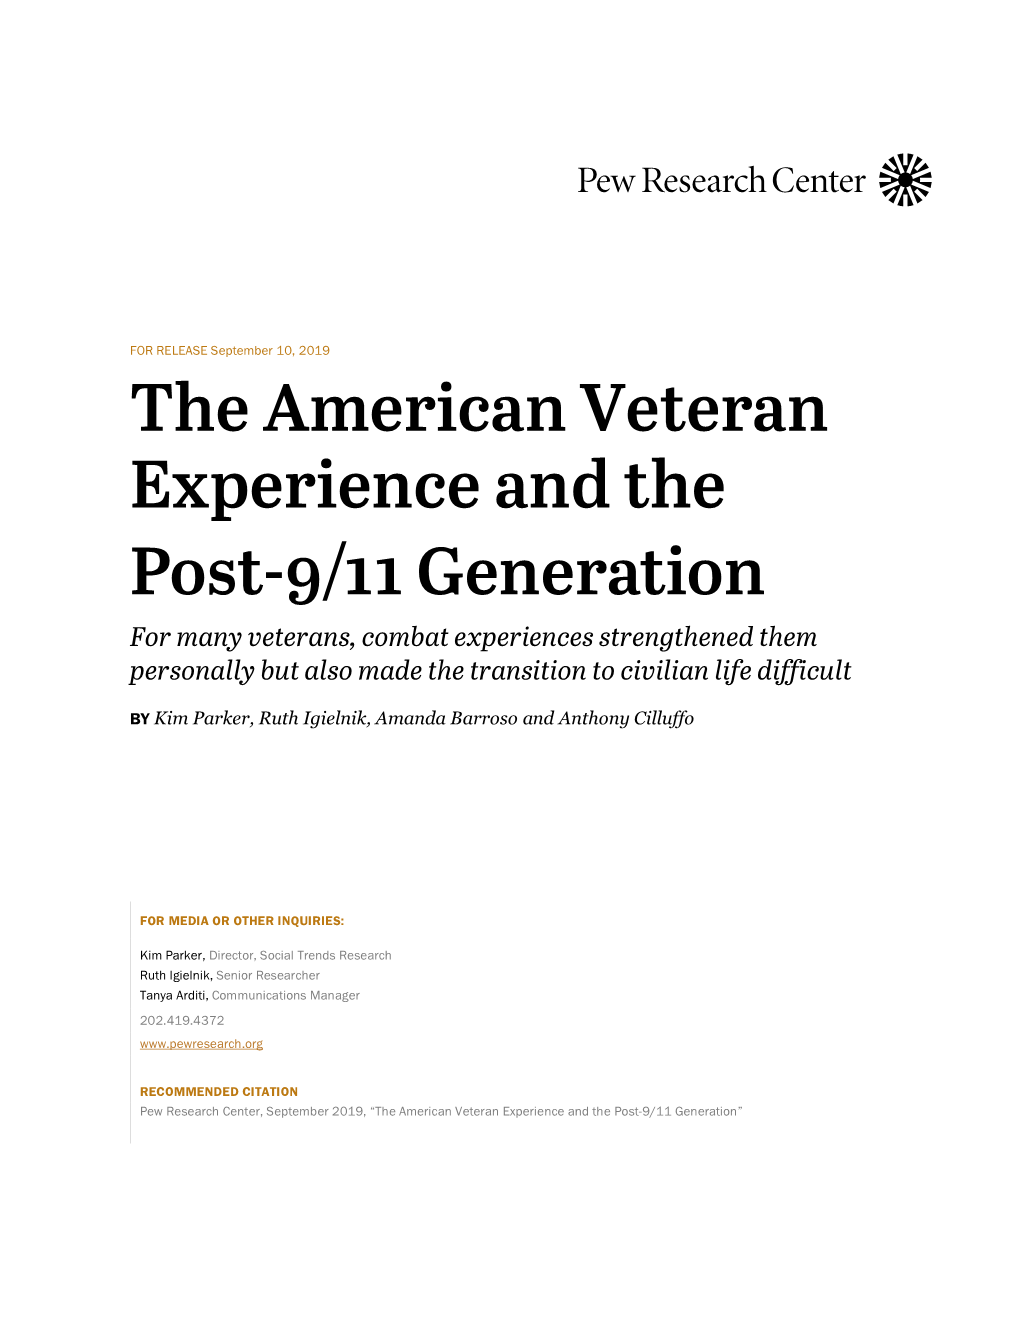 The American Veteran Experience and the Post-9/11 Generation